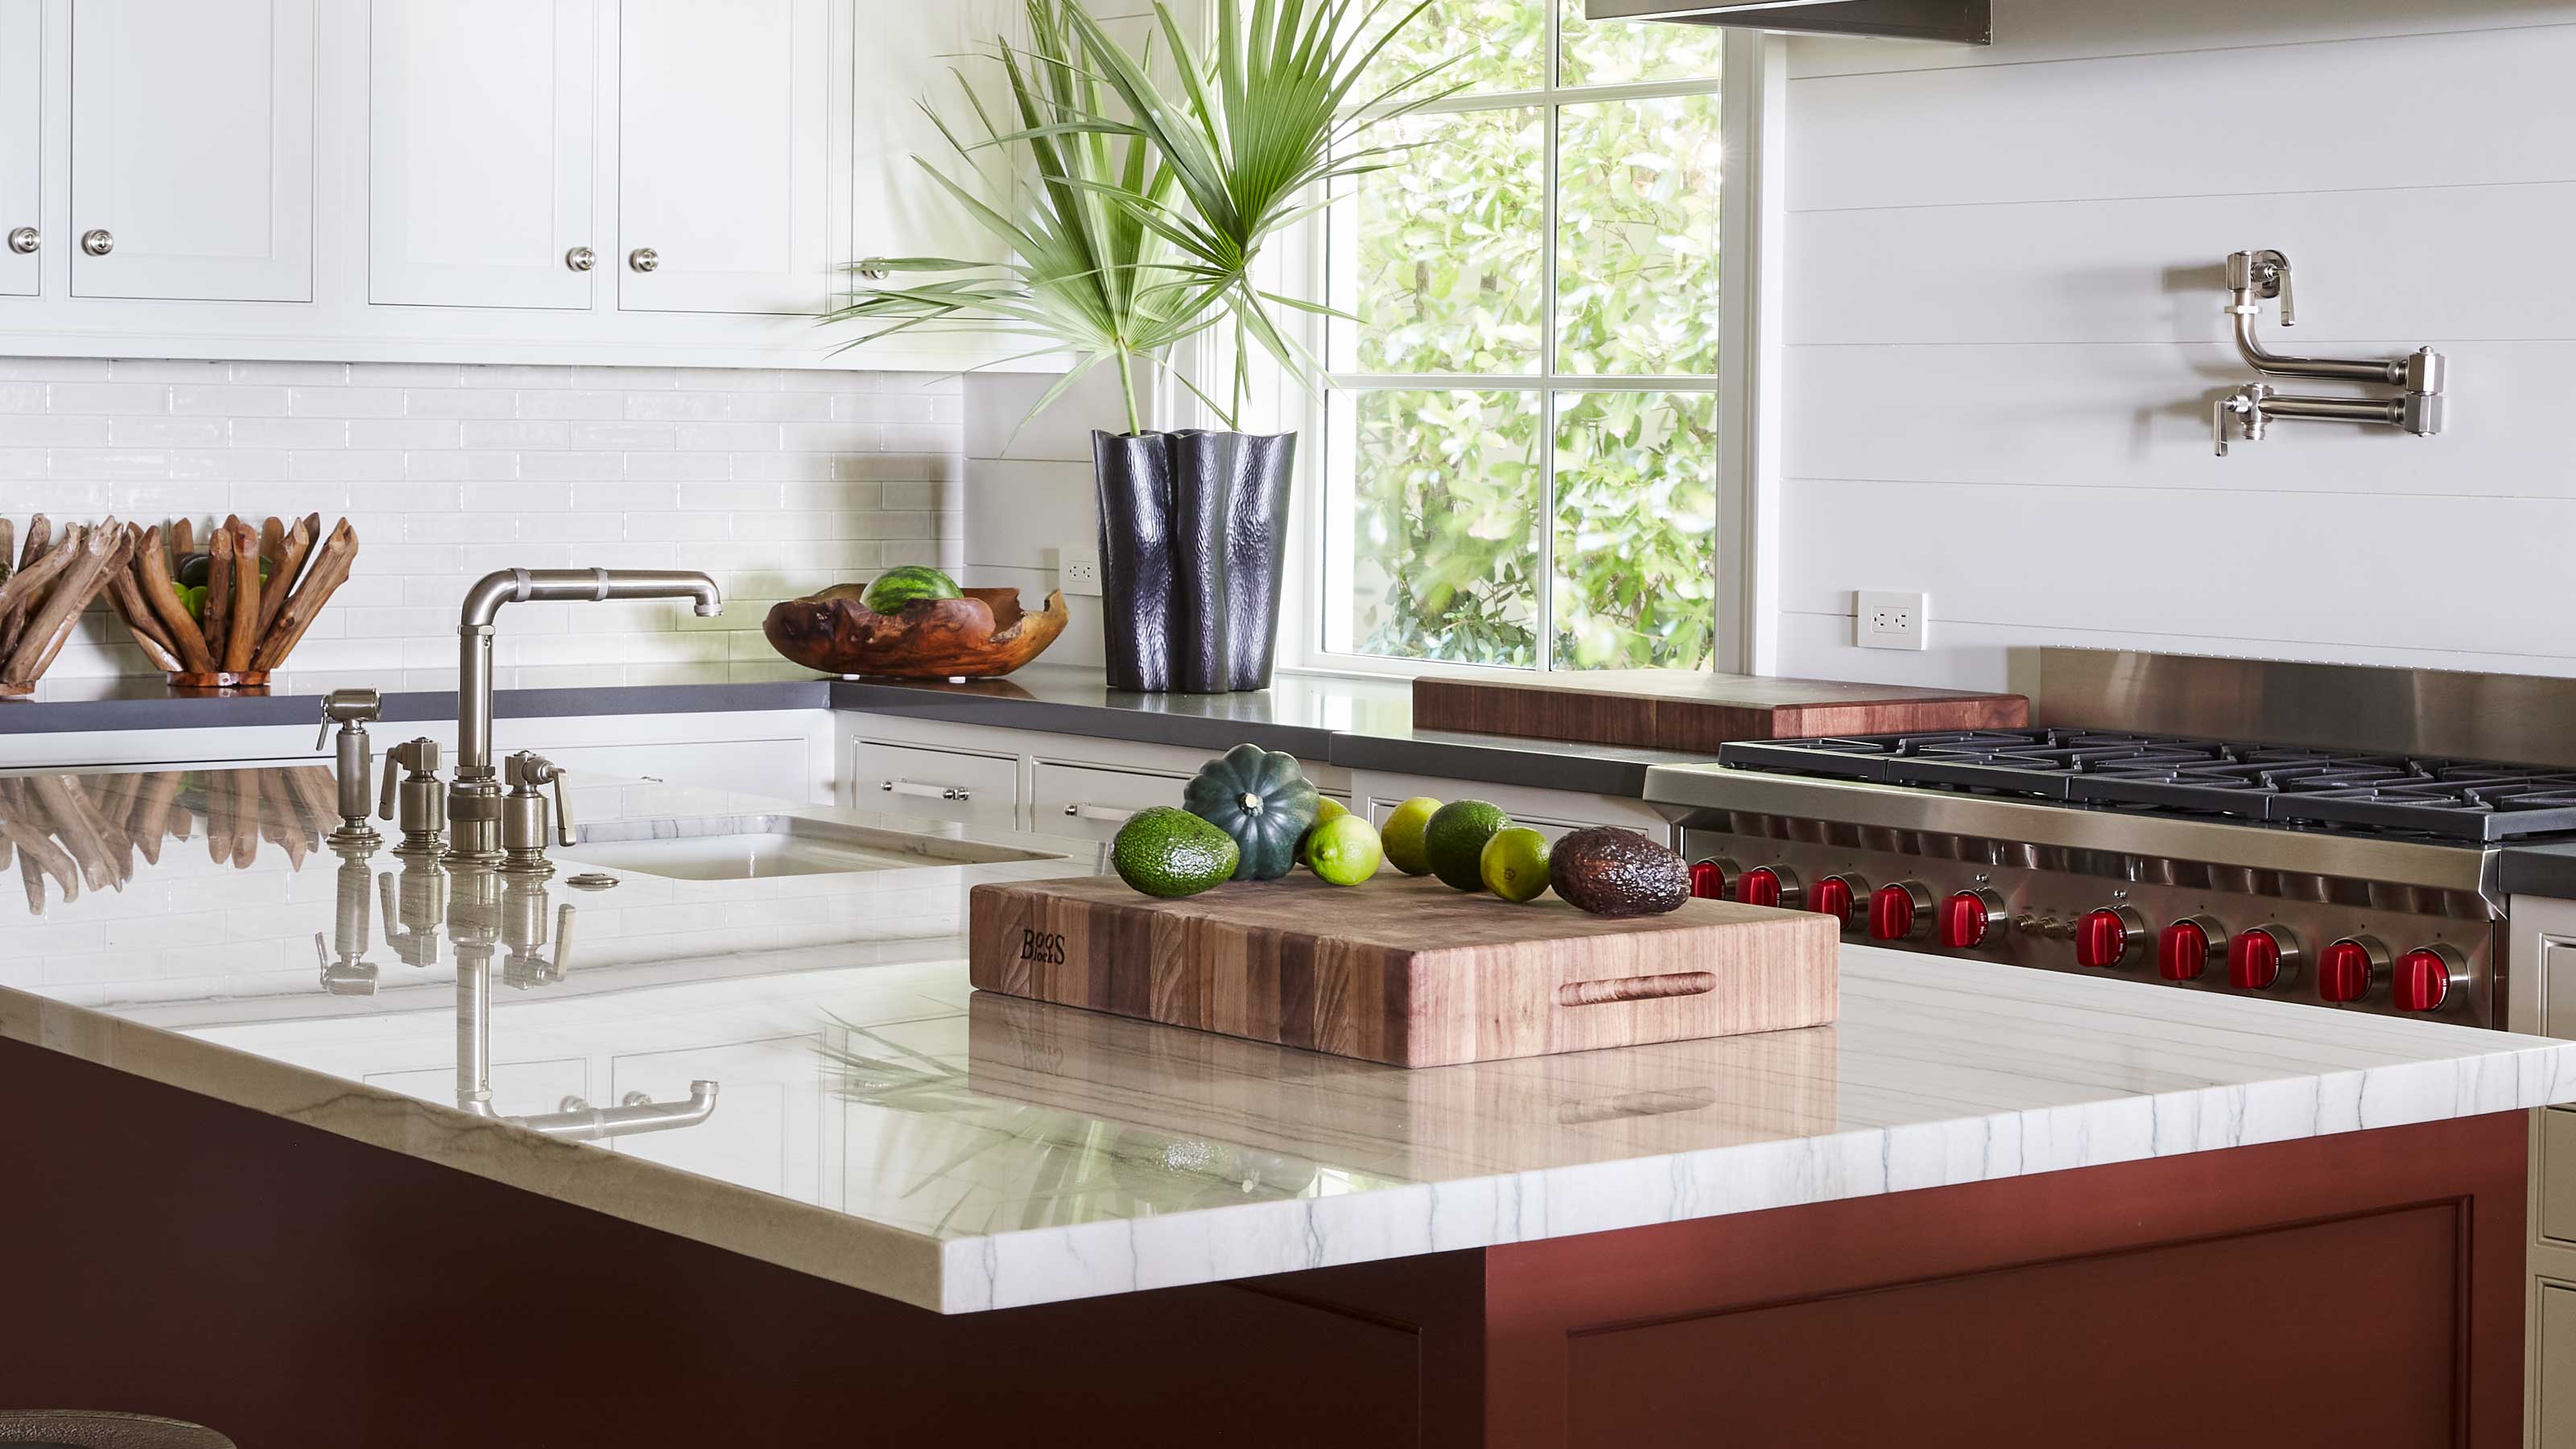 What are the best countertops for cooking?